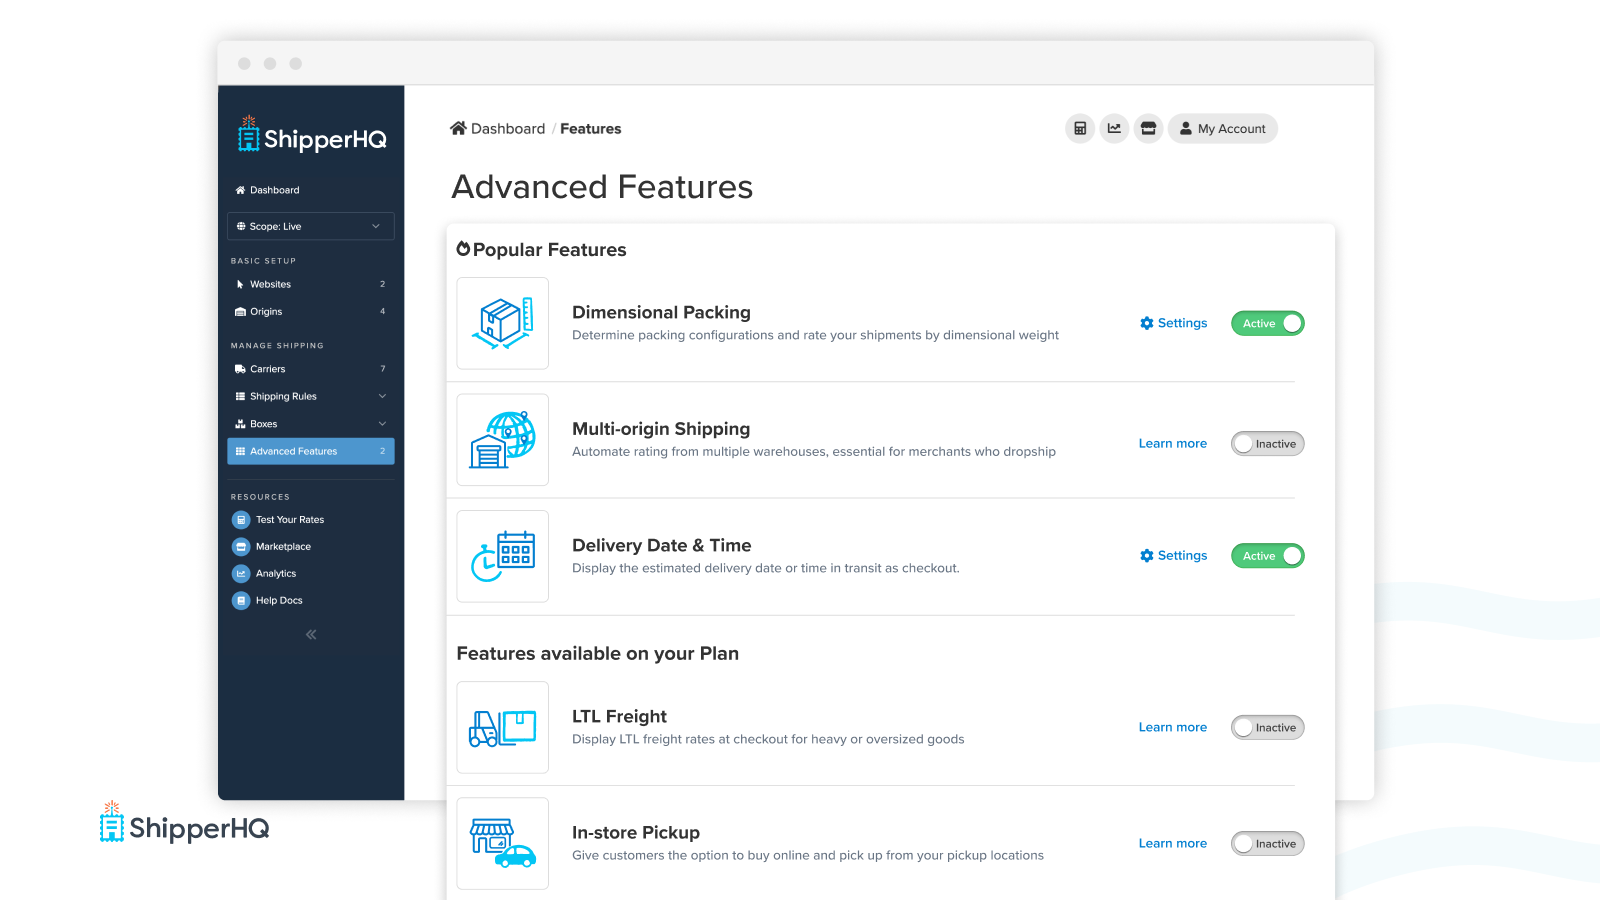 ShipperHQ Dashboard View of Advanced Features